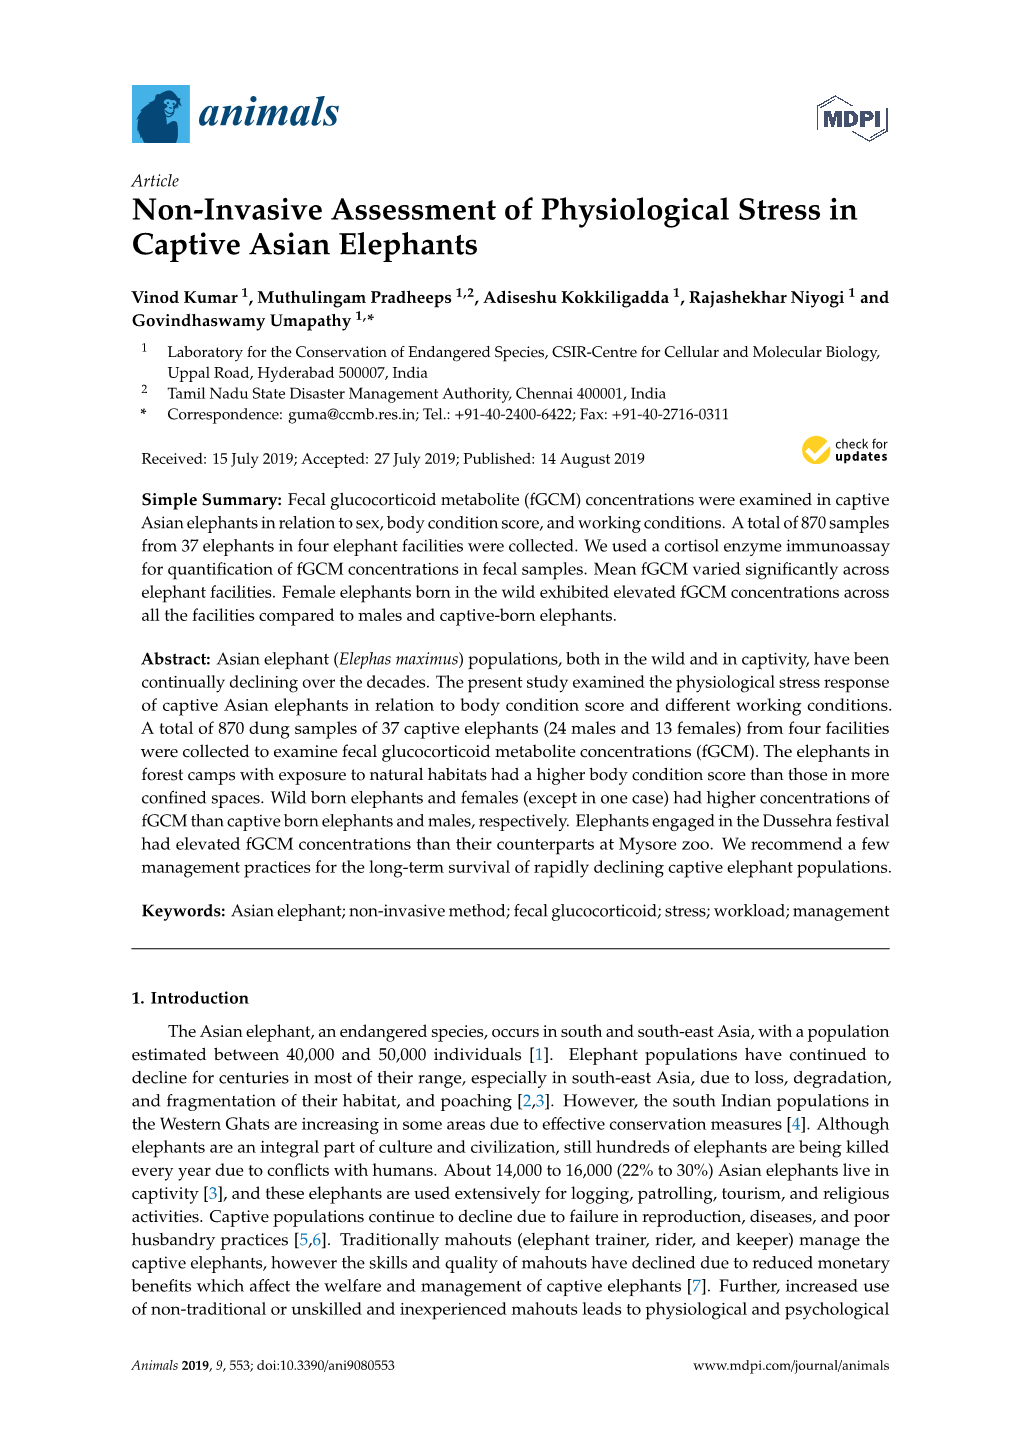 Non-Invasive Assessment of Physiological Stress in Captive Asian Elephants